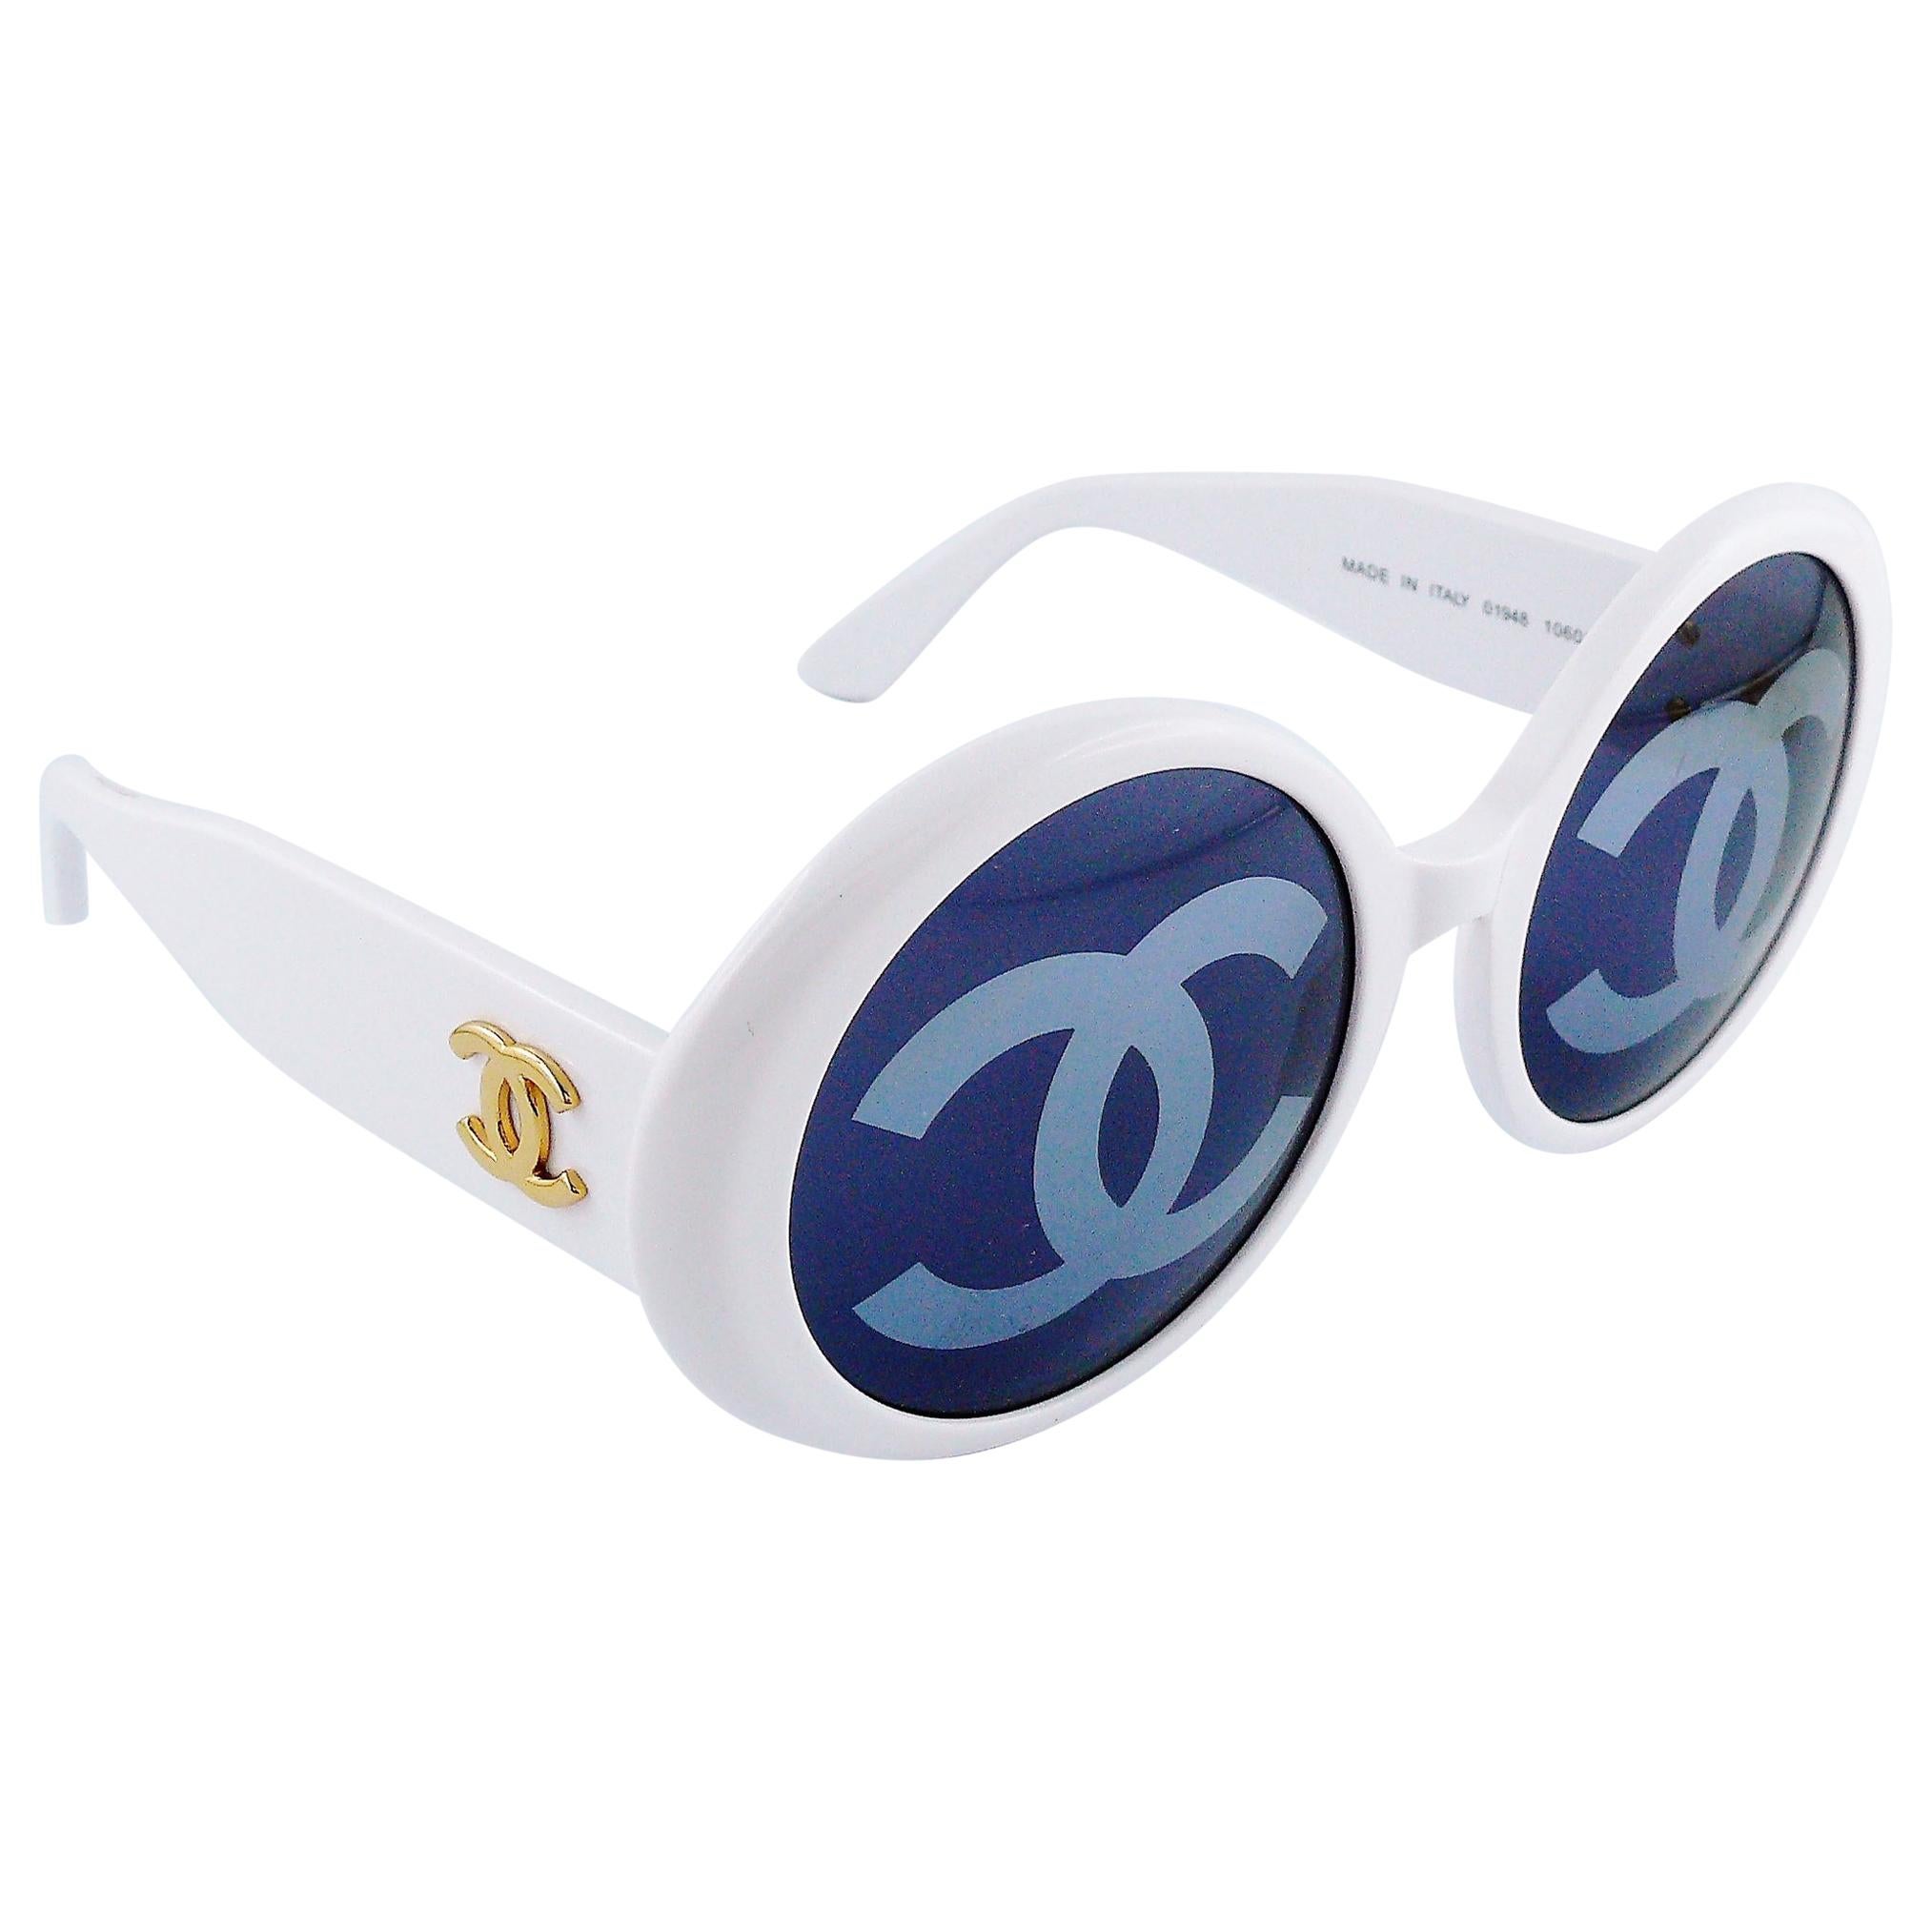 Vintage 1993 Iconic CHANEL PARIS Round White Sunglasses For Sale at 1stDibs